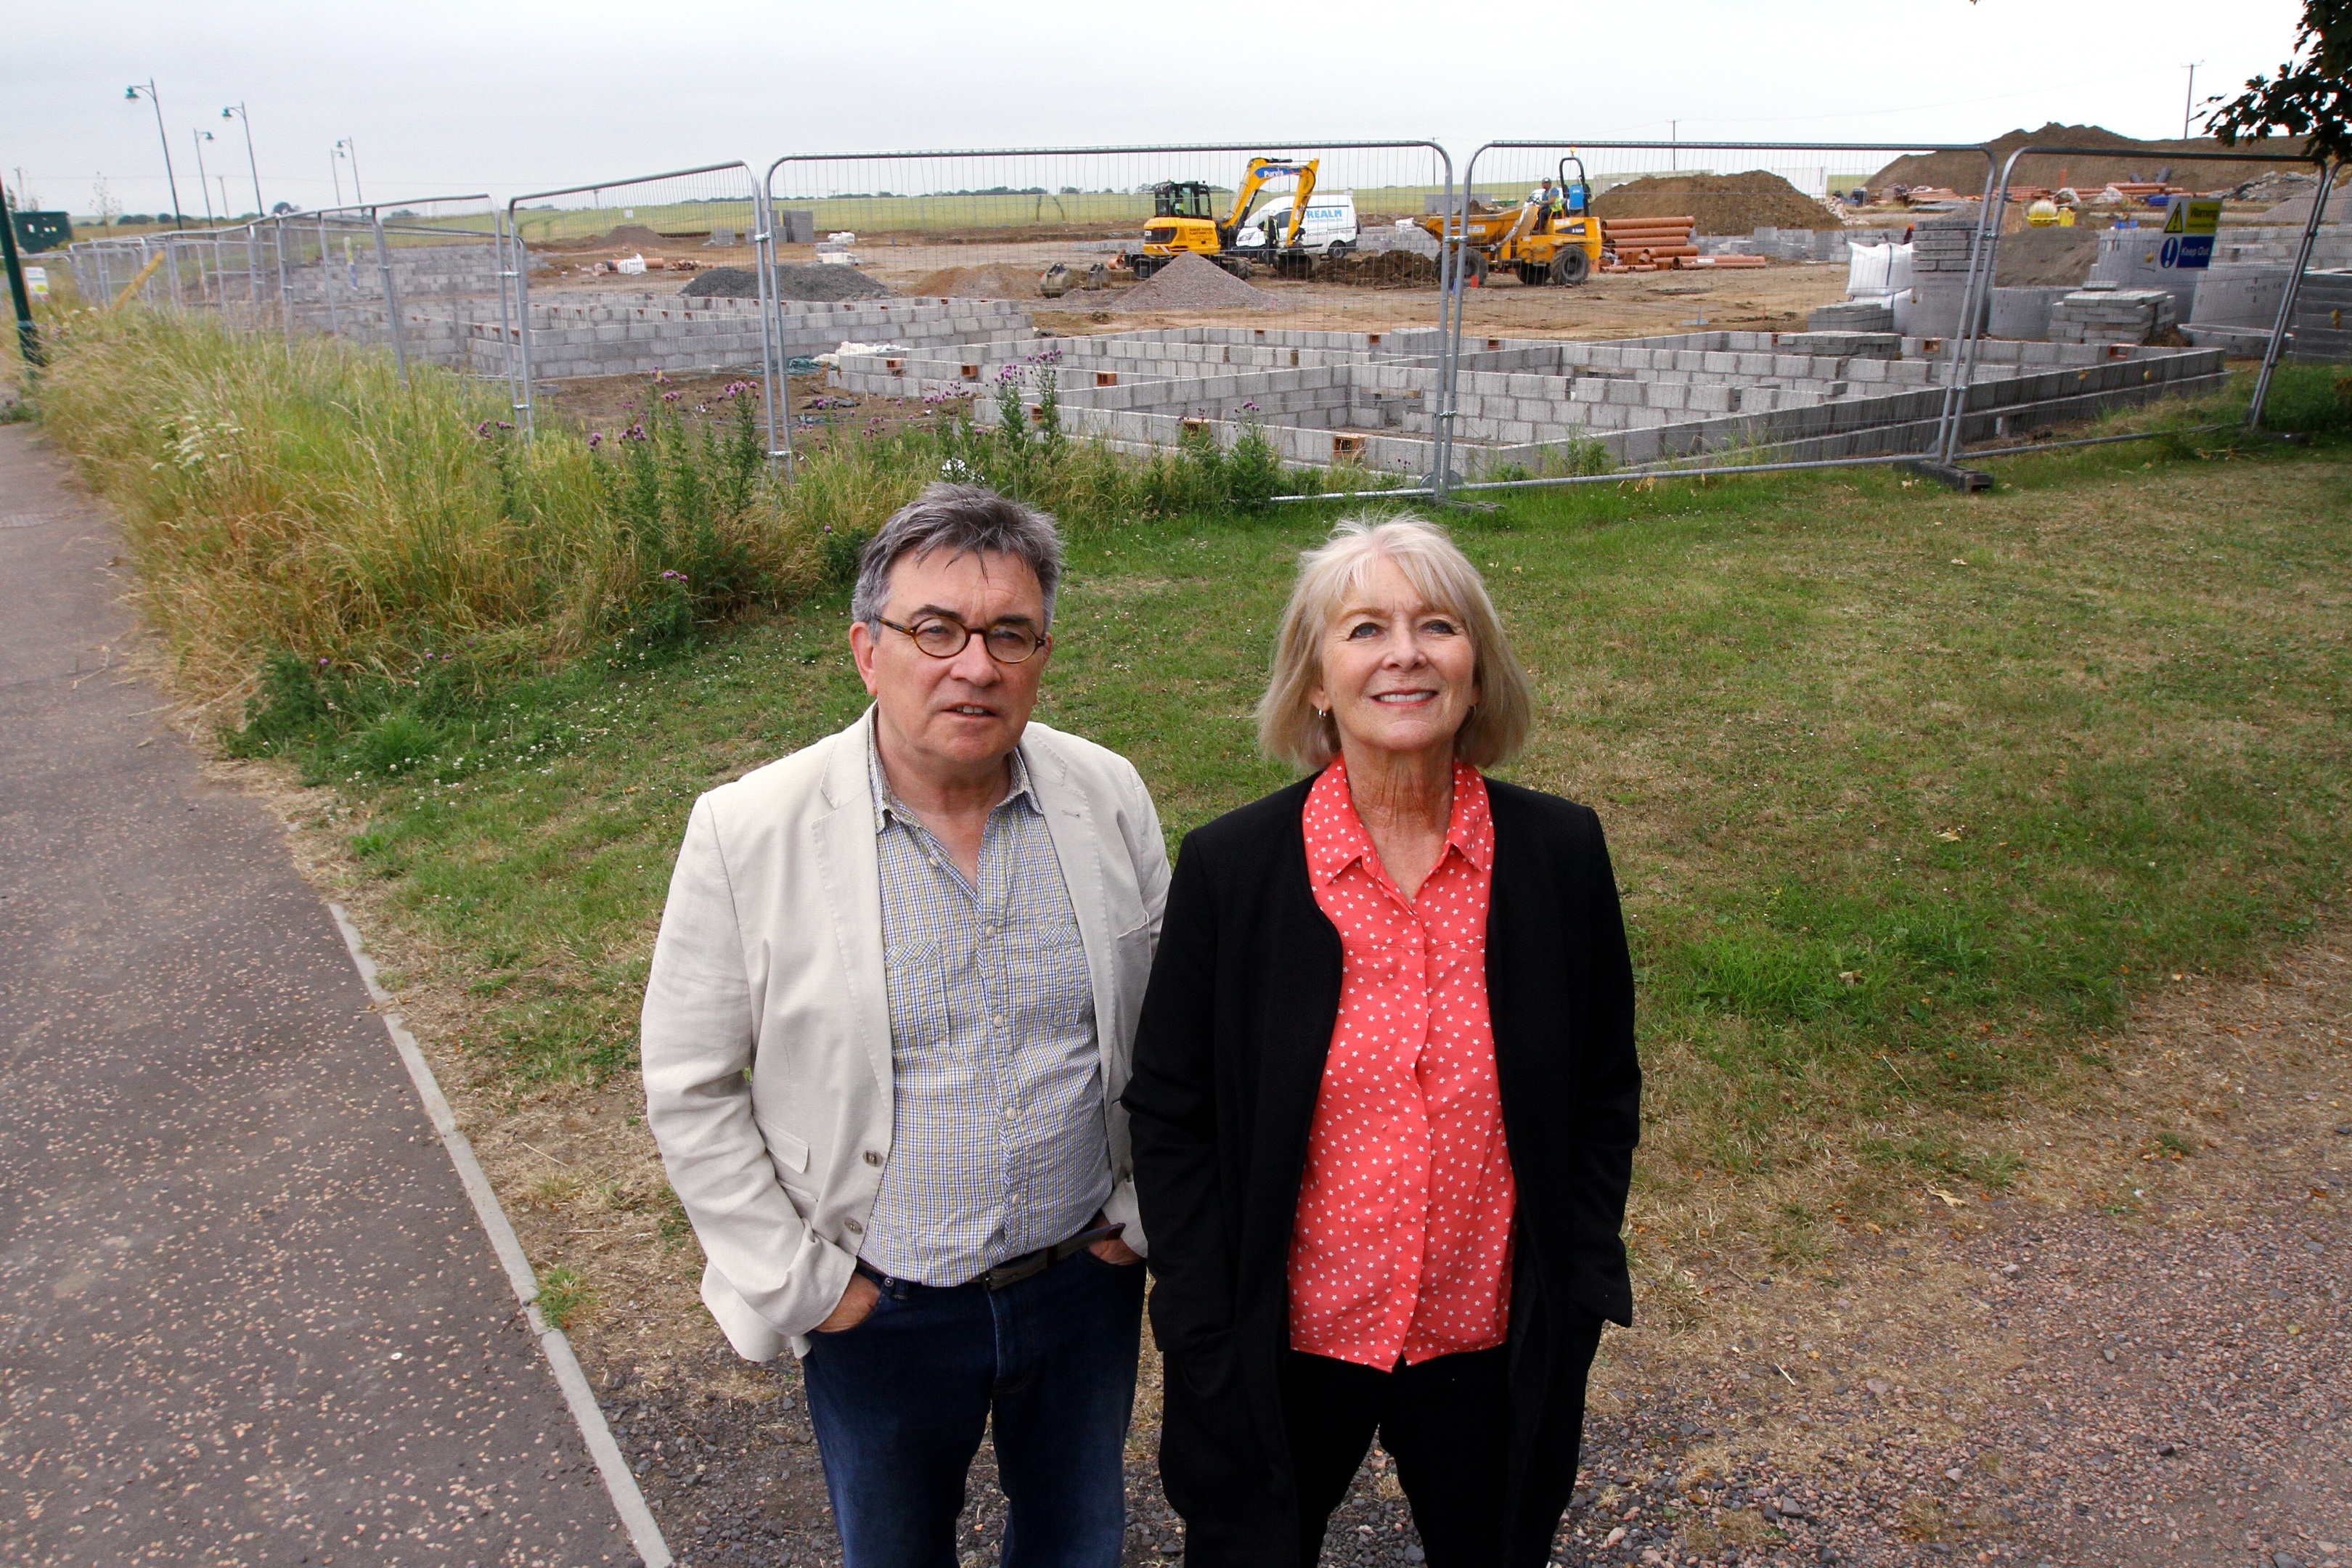 Local residents Kate Holy and Martin Dibbs at the site for the new housing in Station Road,
Kingsbarns.